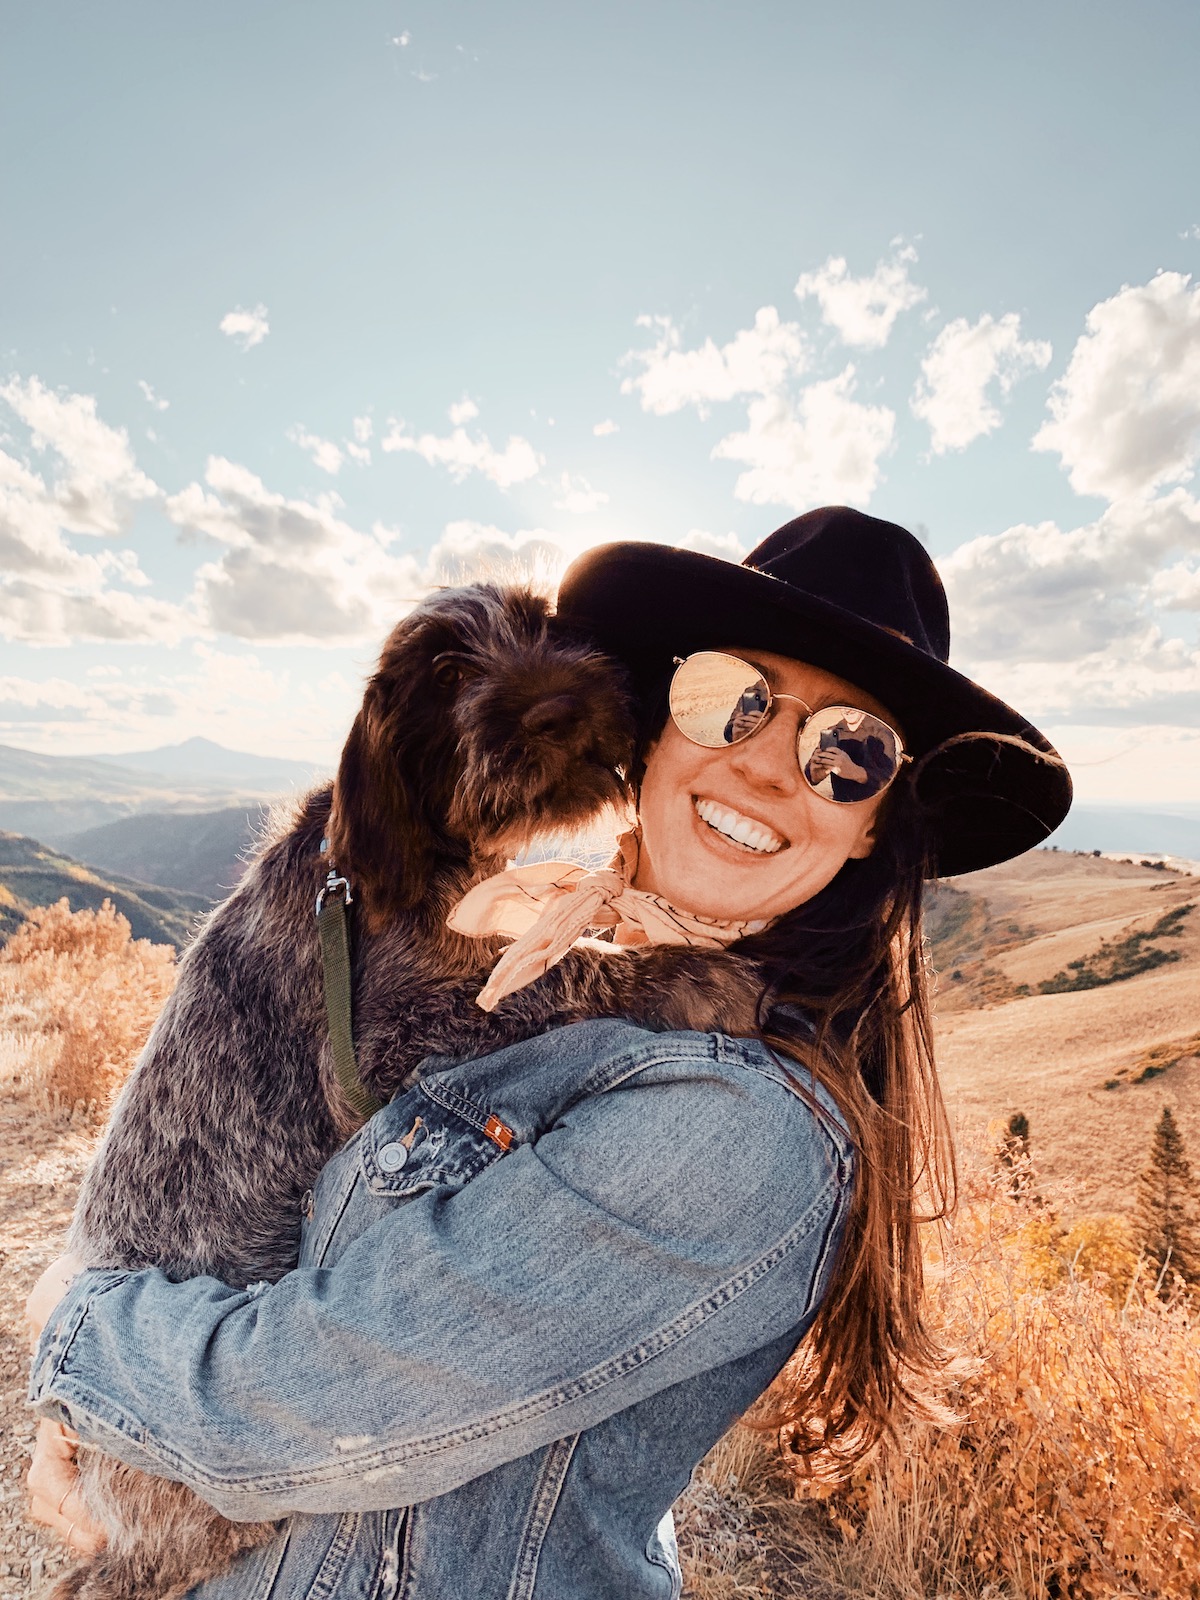 Photo of woman holding dog in a mountainous setting